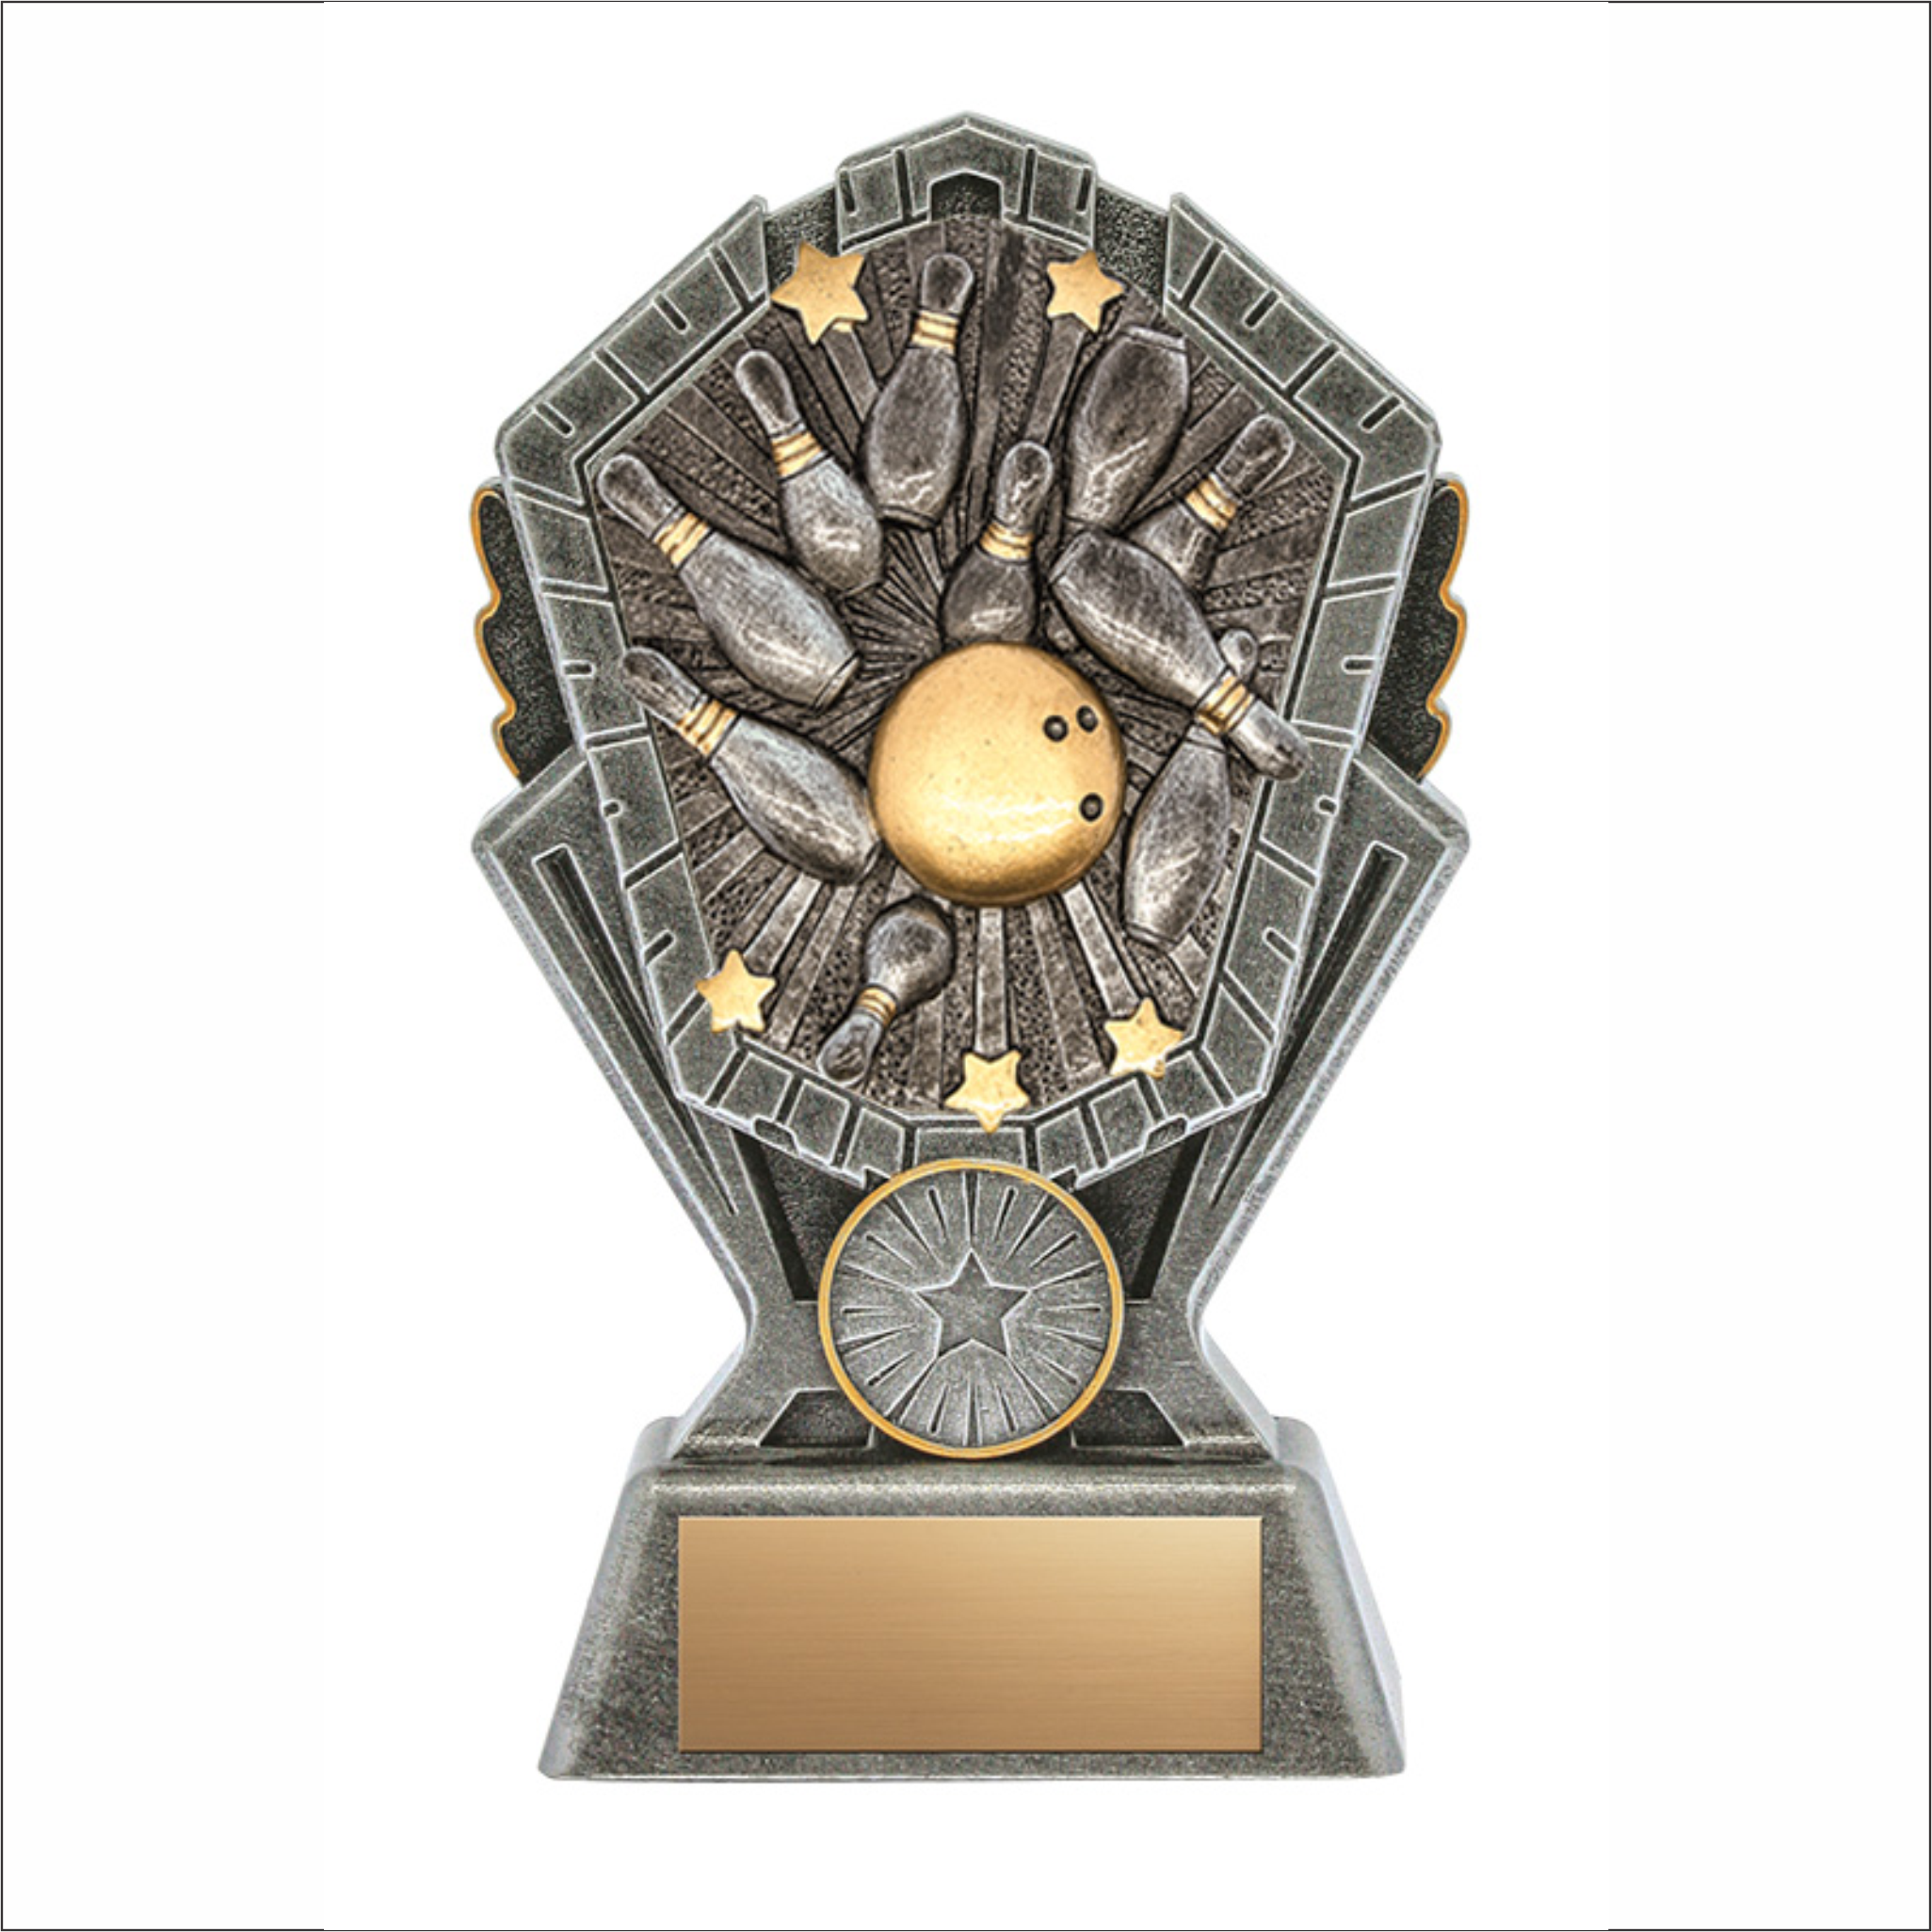 Bowling trophy - Cosmos series